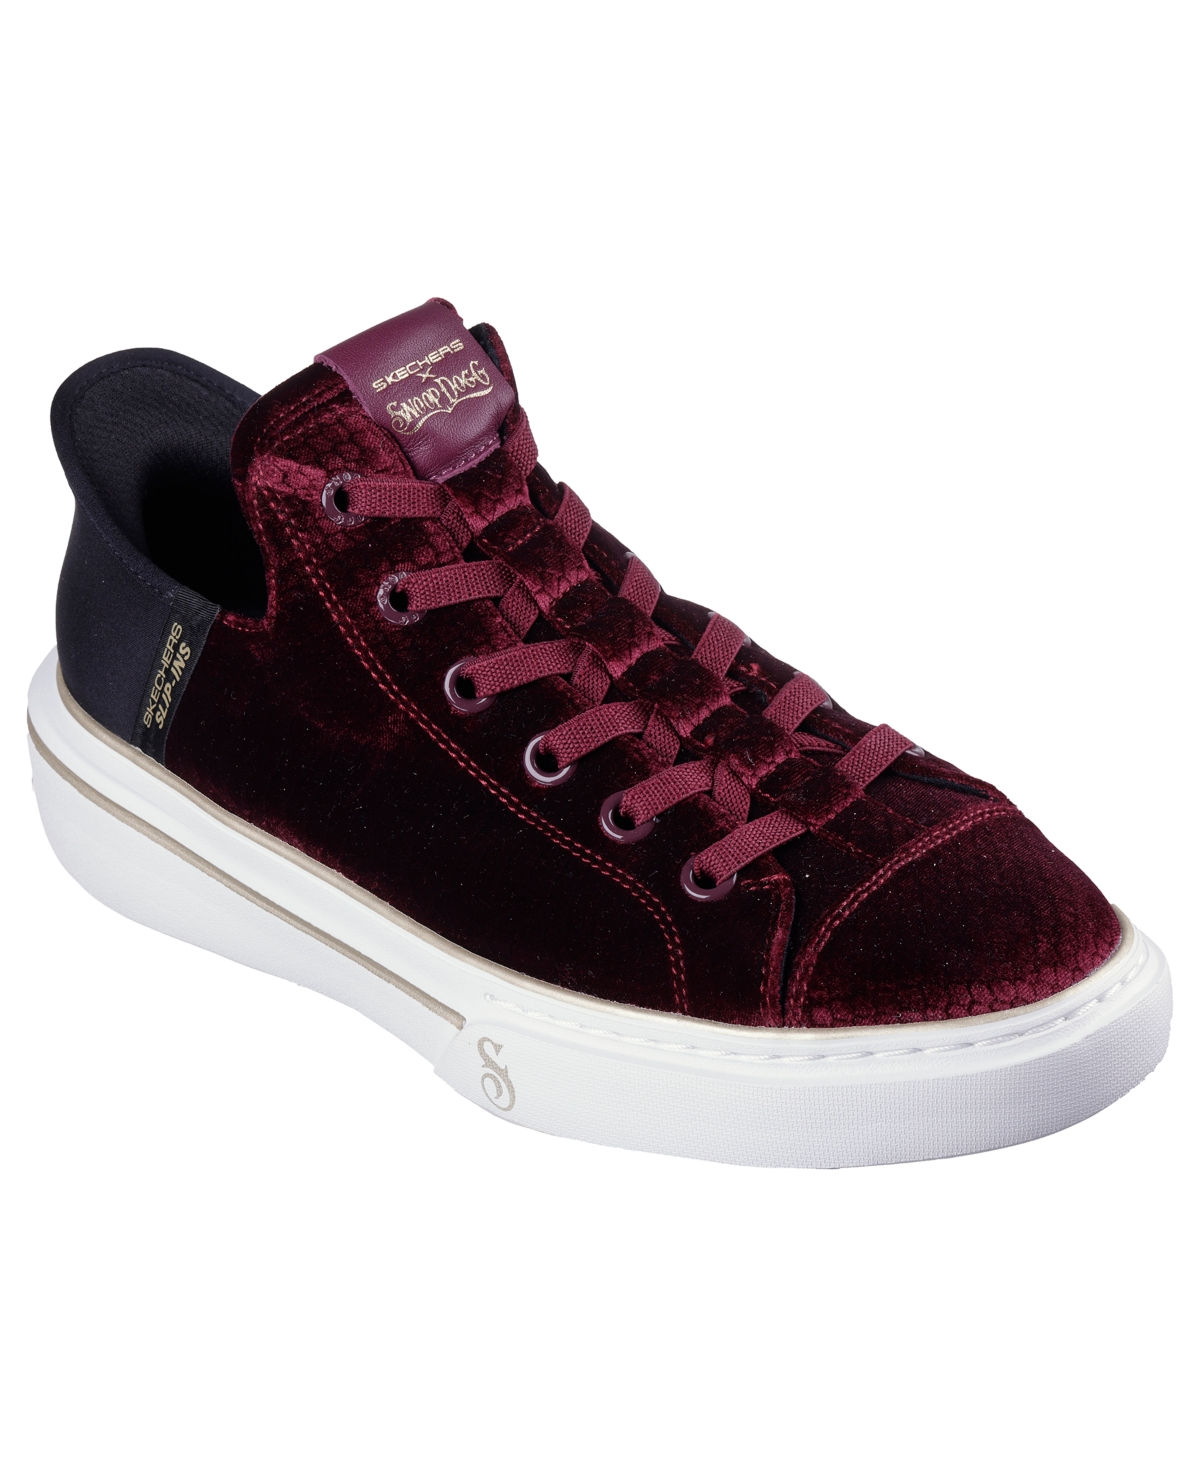 Men's Casual Sneakers from Finish Line - Burgundy